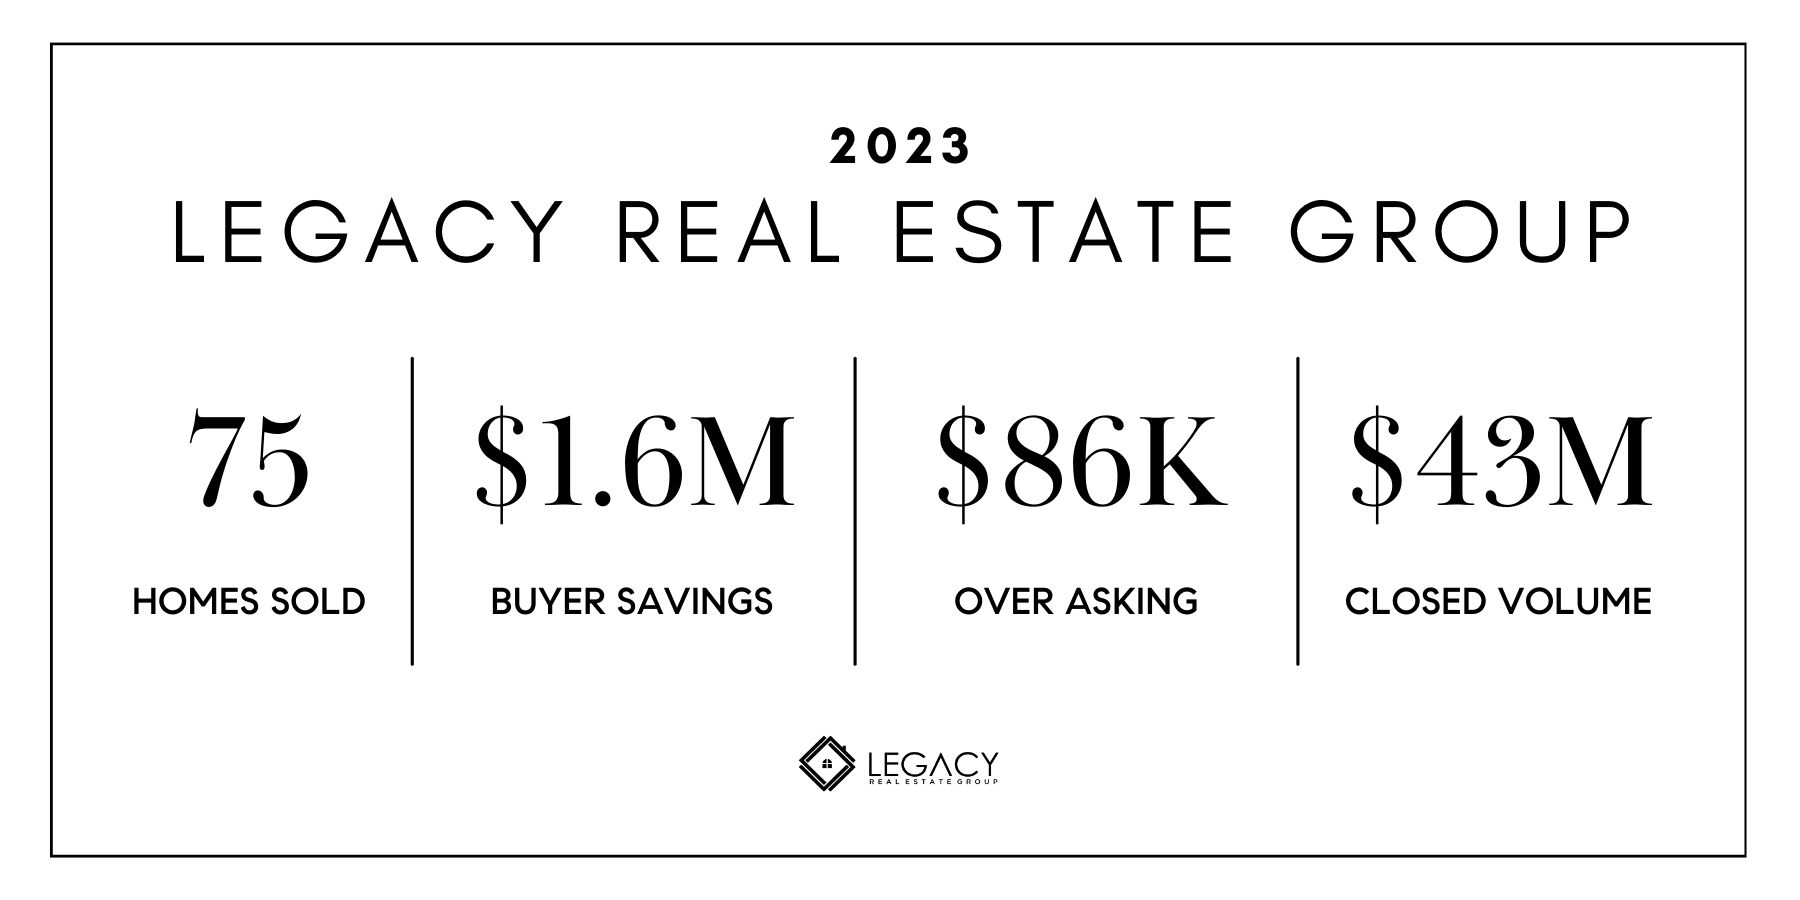 Legacy Real Estate Group Stats 2023